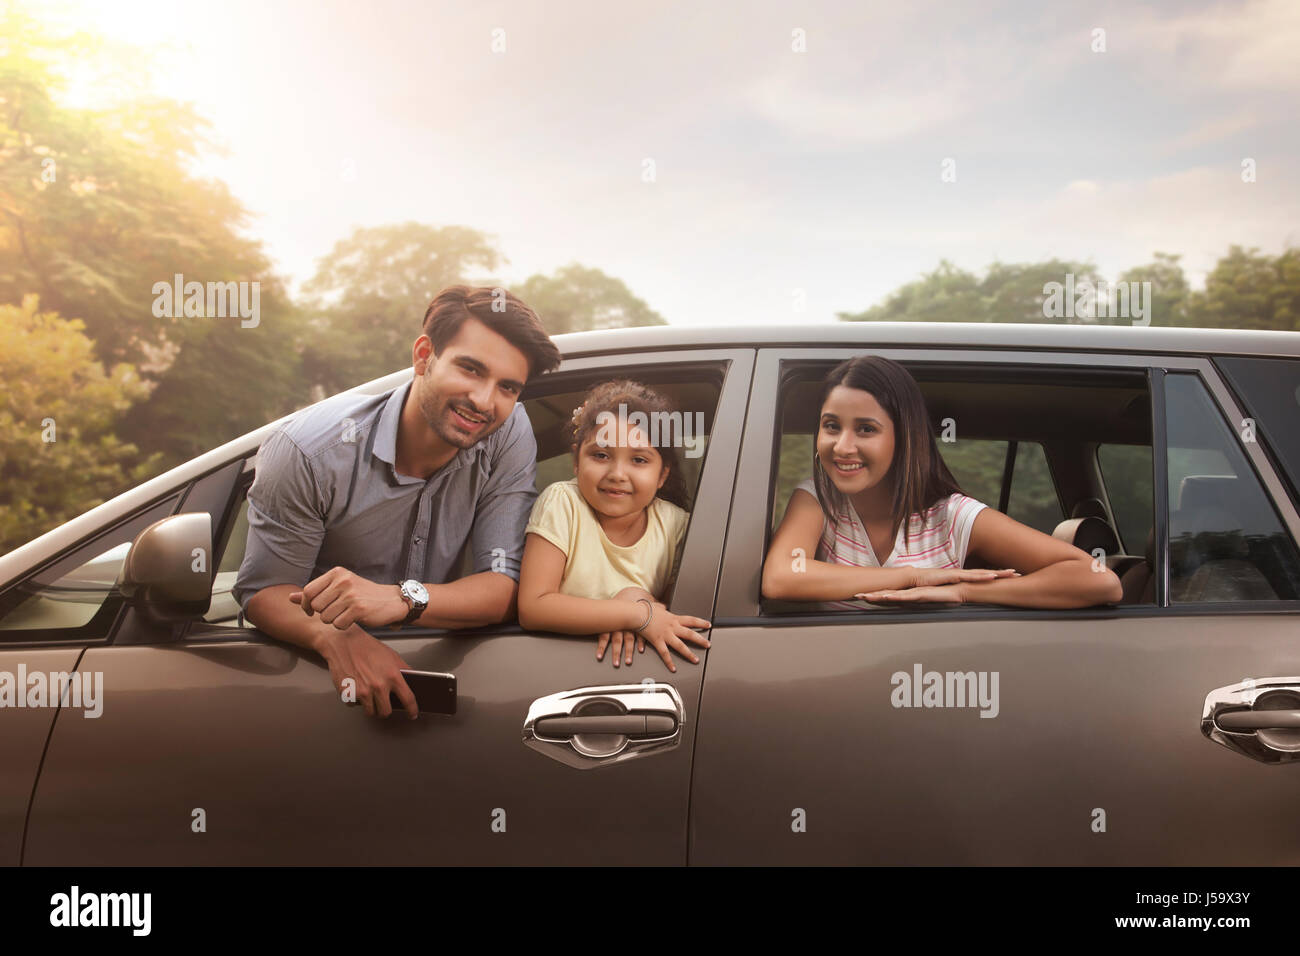 Family looking out car window Stock Photo